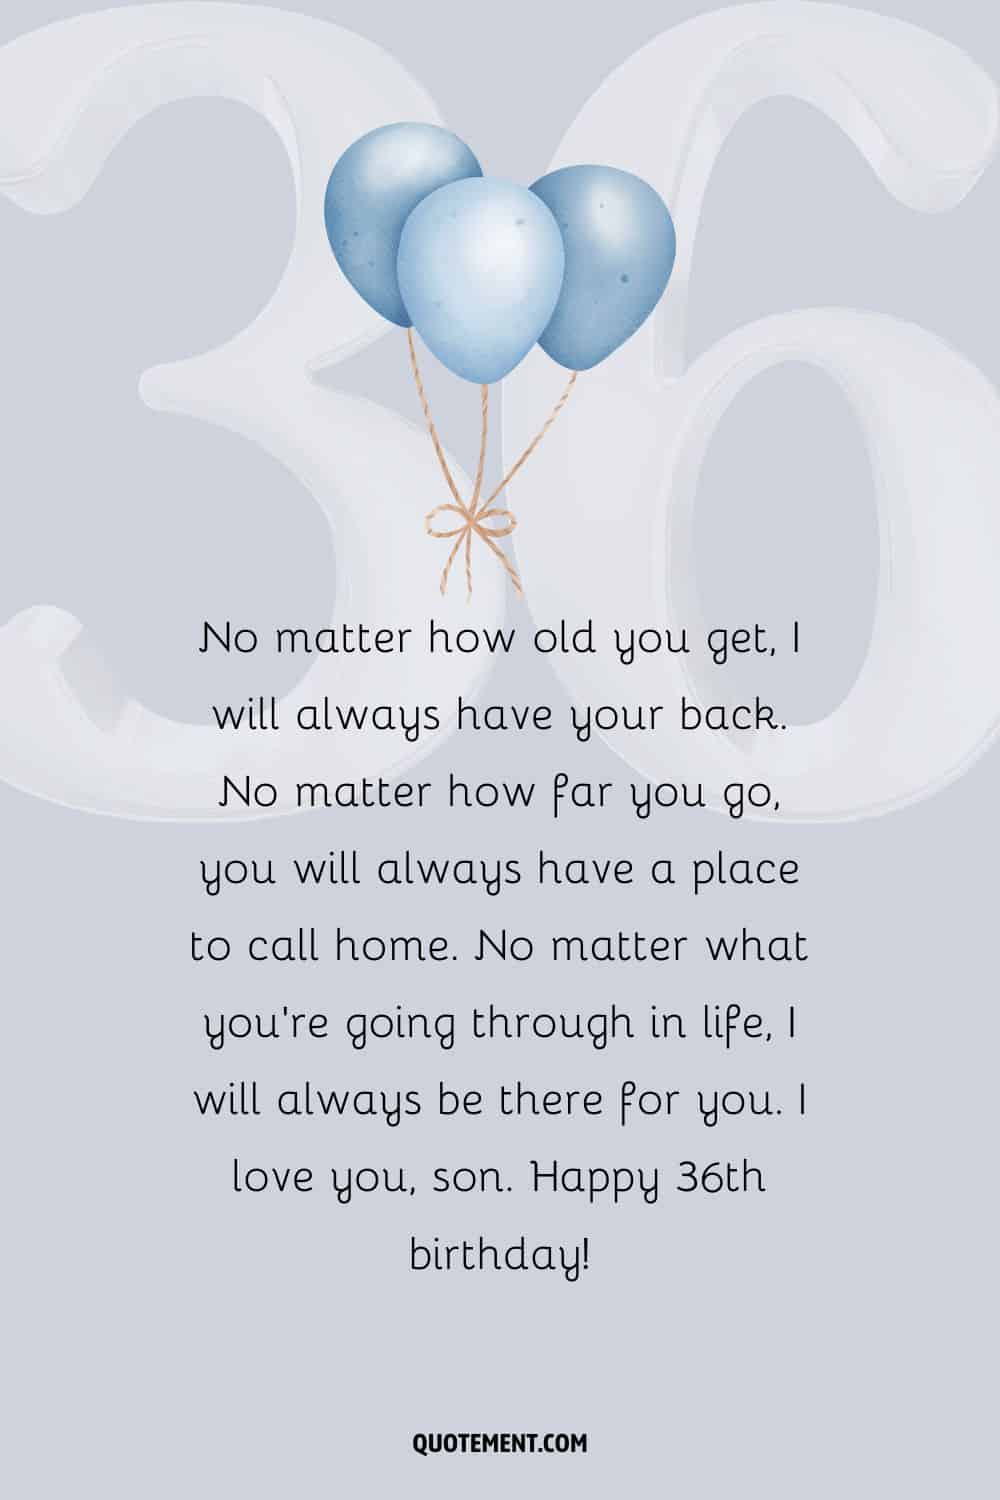 Illustration of balloons and number 36 representing birthday wish for a son.